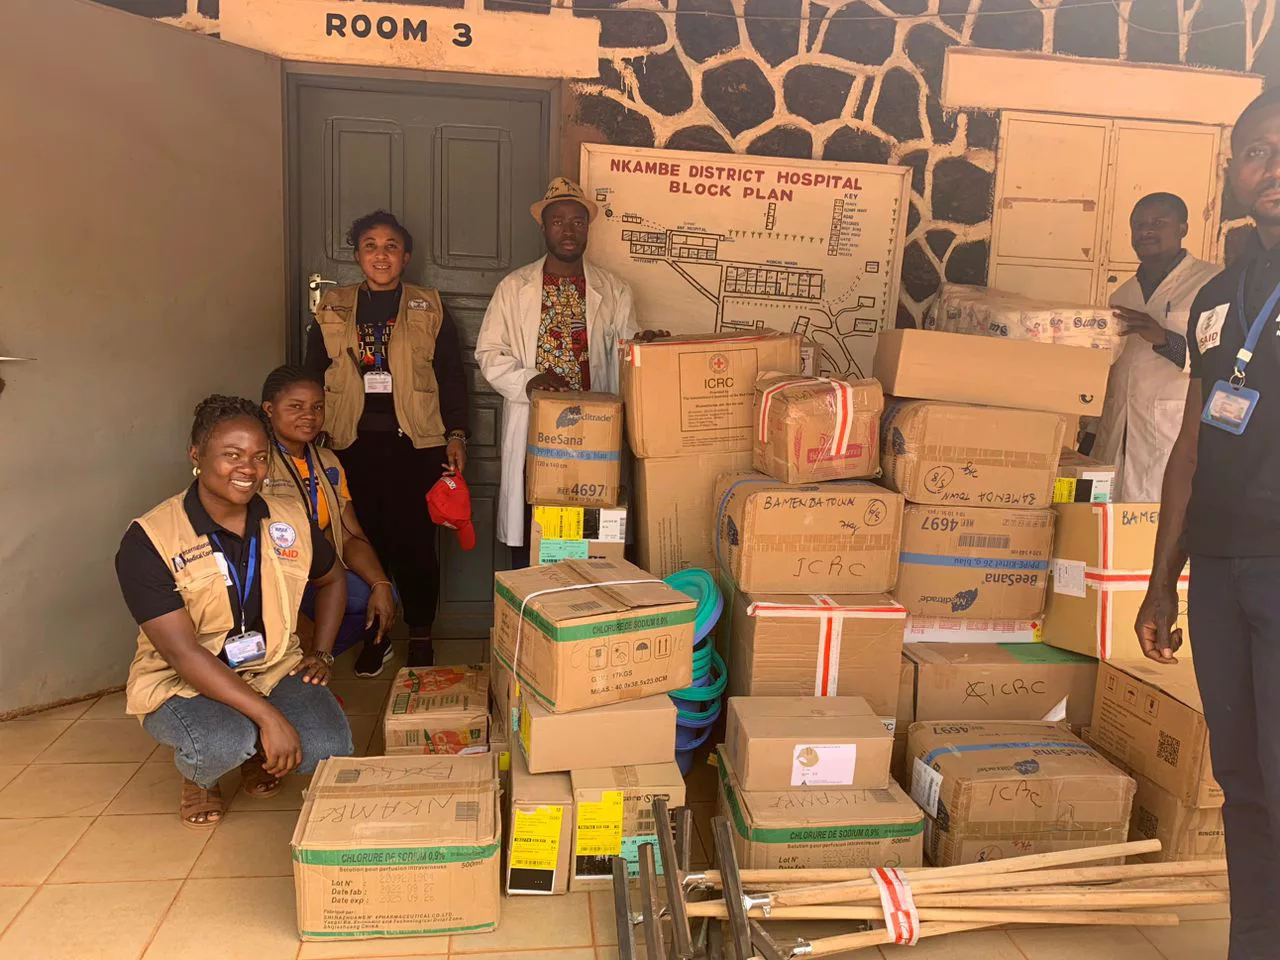 Our team delivers medical supplies in response to the Nkambe explosion.